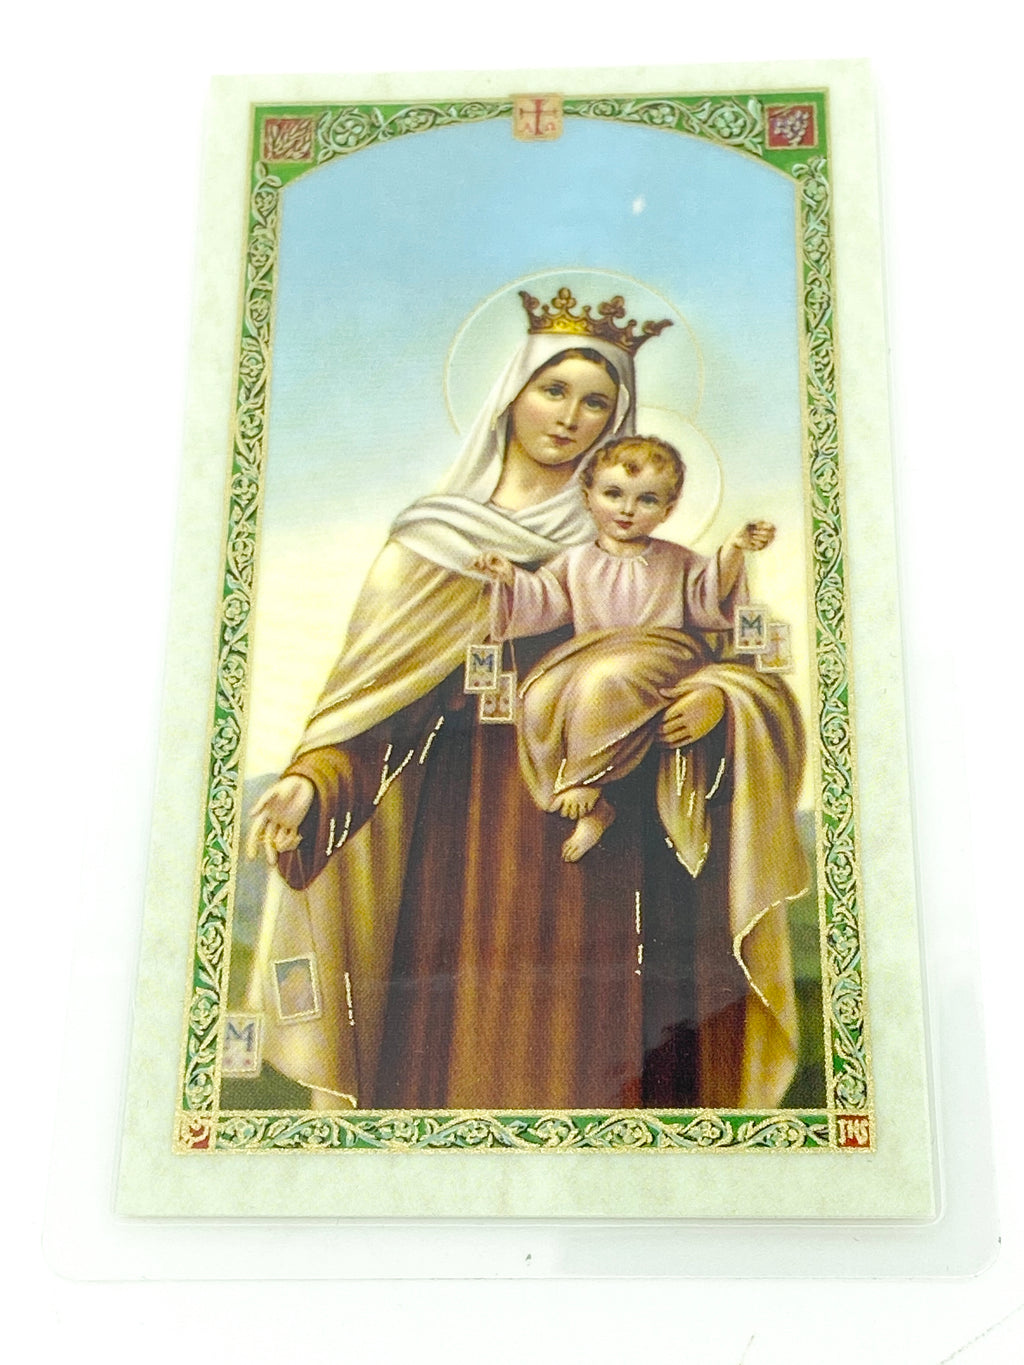 Novena to Our Lady of Mt. Carmel  Laminated Holy Card (Plastic Covered) - Unique Catholic Gifts